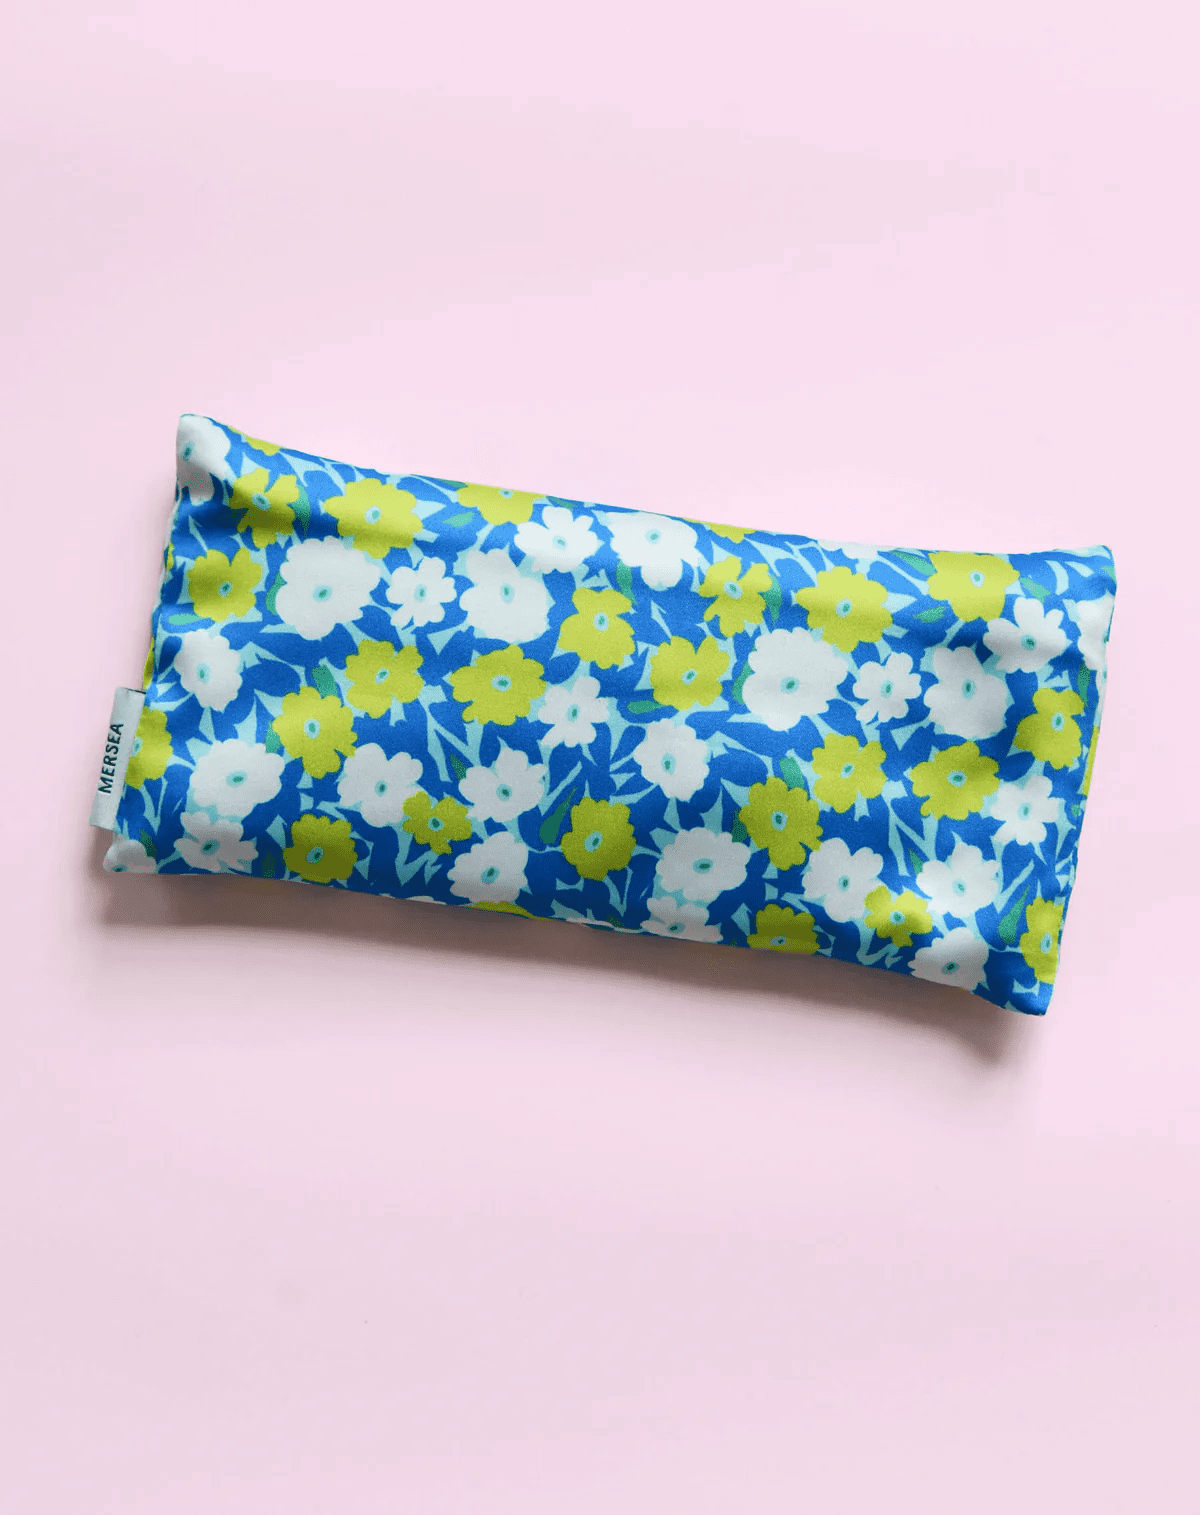 Nuit Therapeutic Eye Pillow | Mer Sea | Iris Gifts & Décor